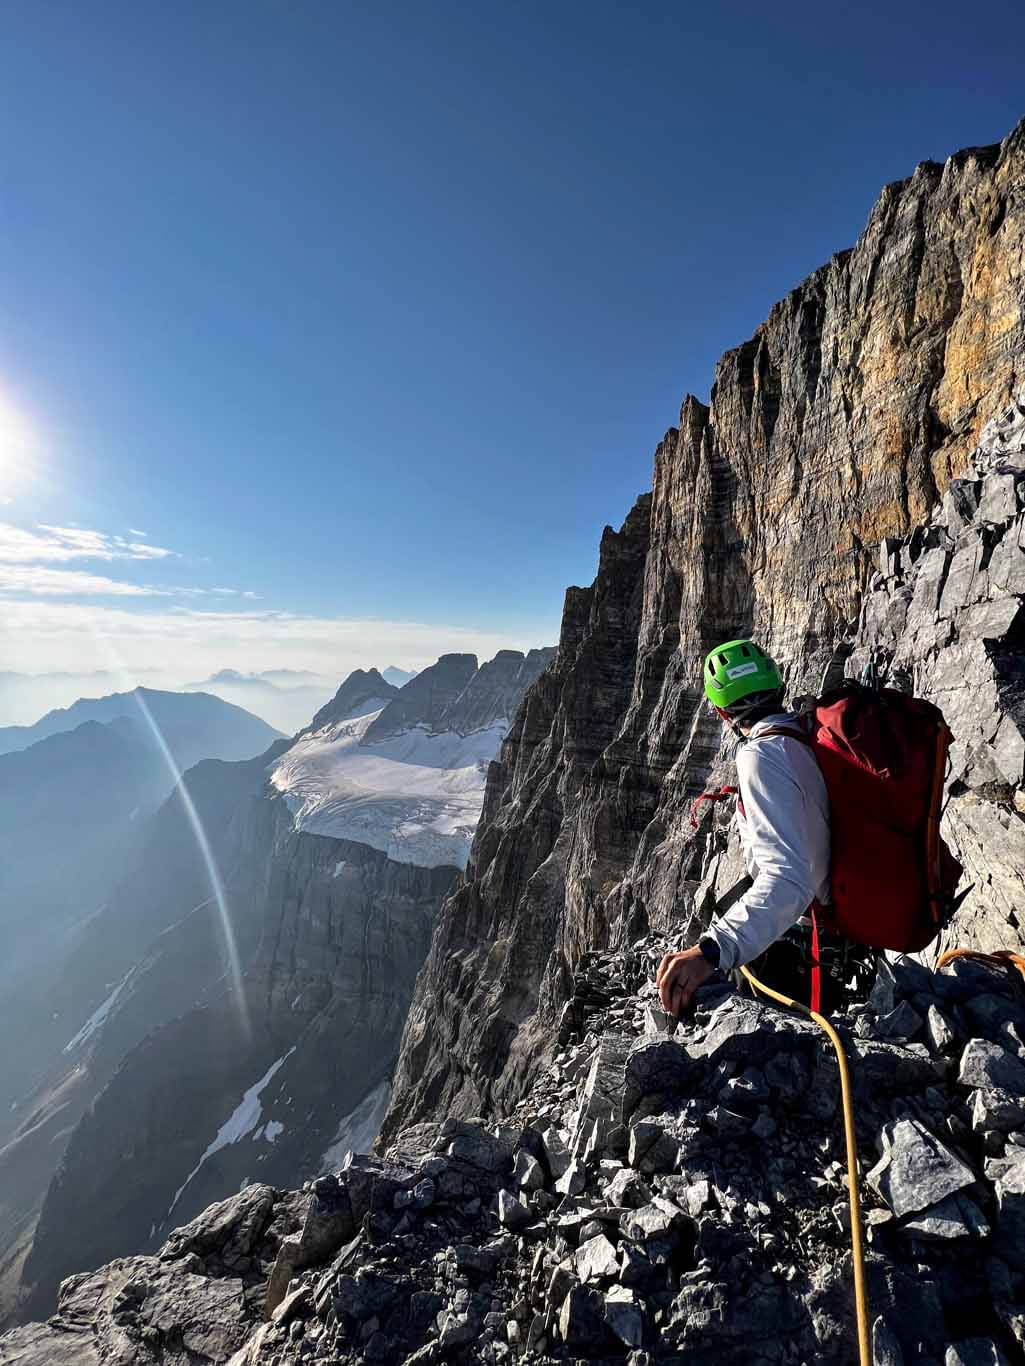 An alpine climbing in the Alberta Rocky Mountains looking at the sunrise while sitting on a ridge